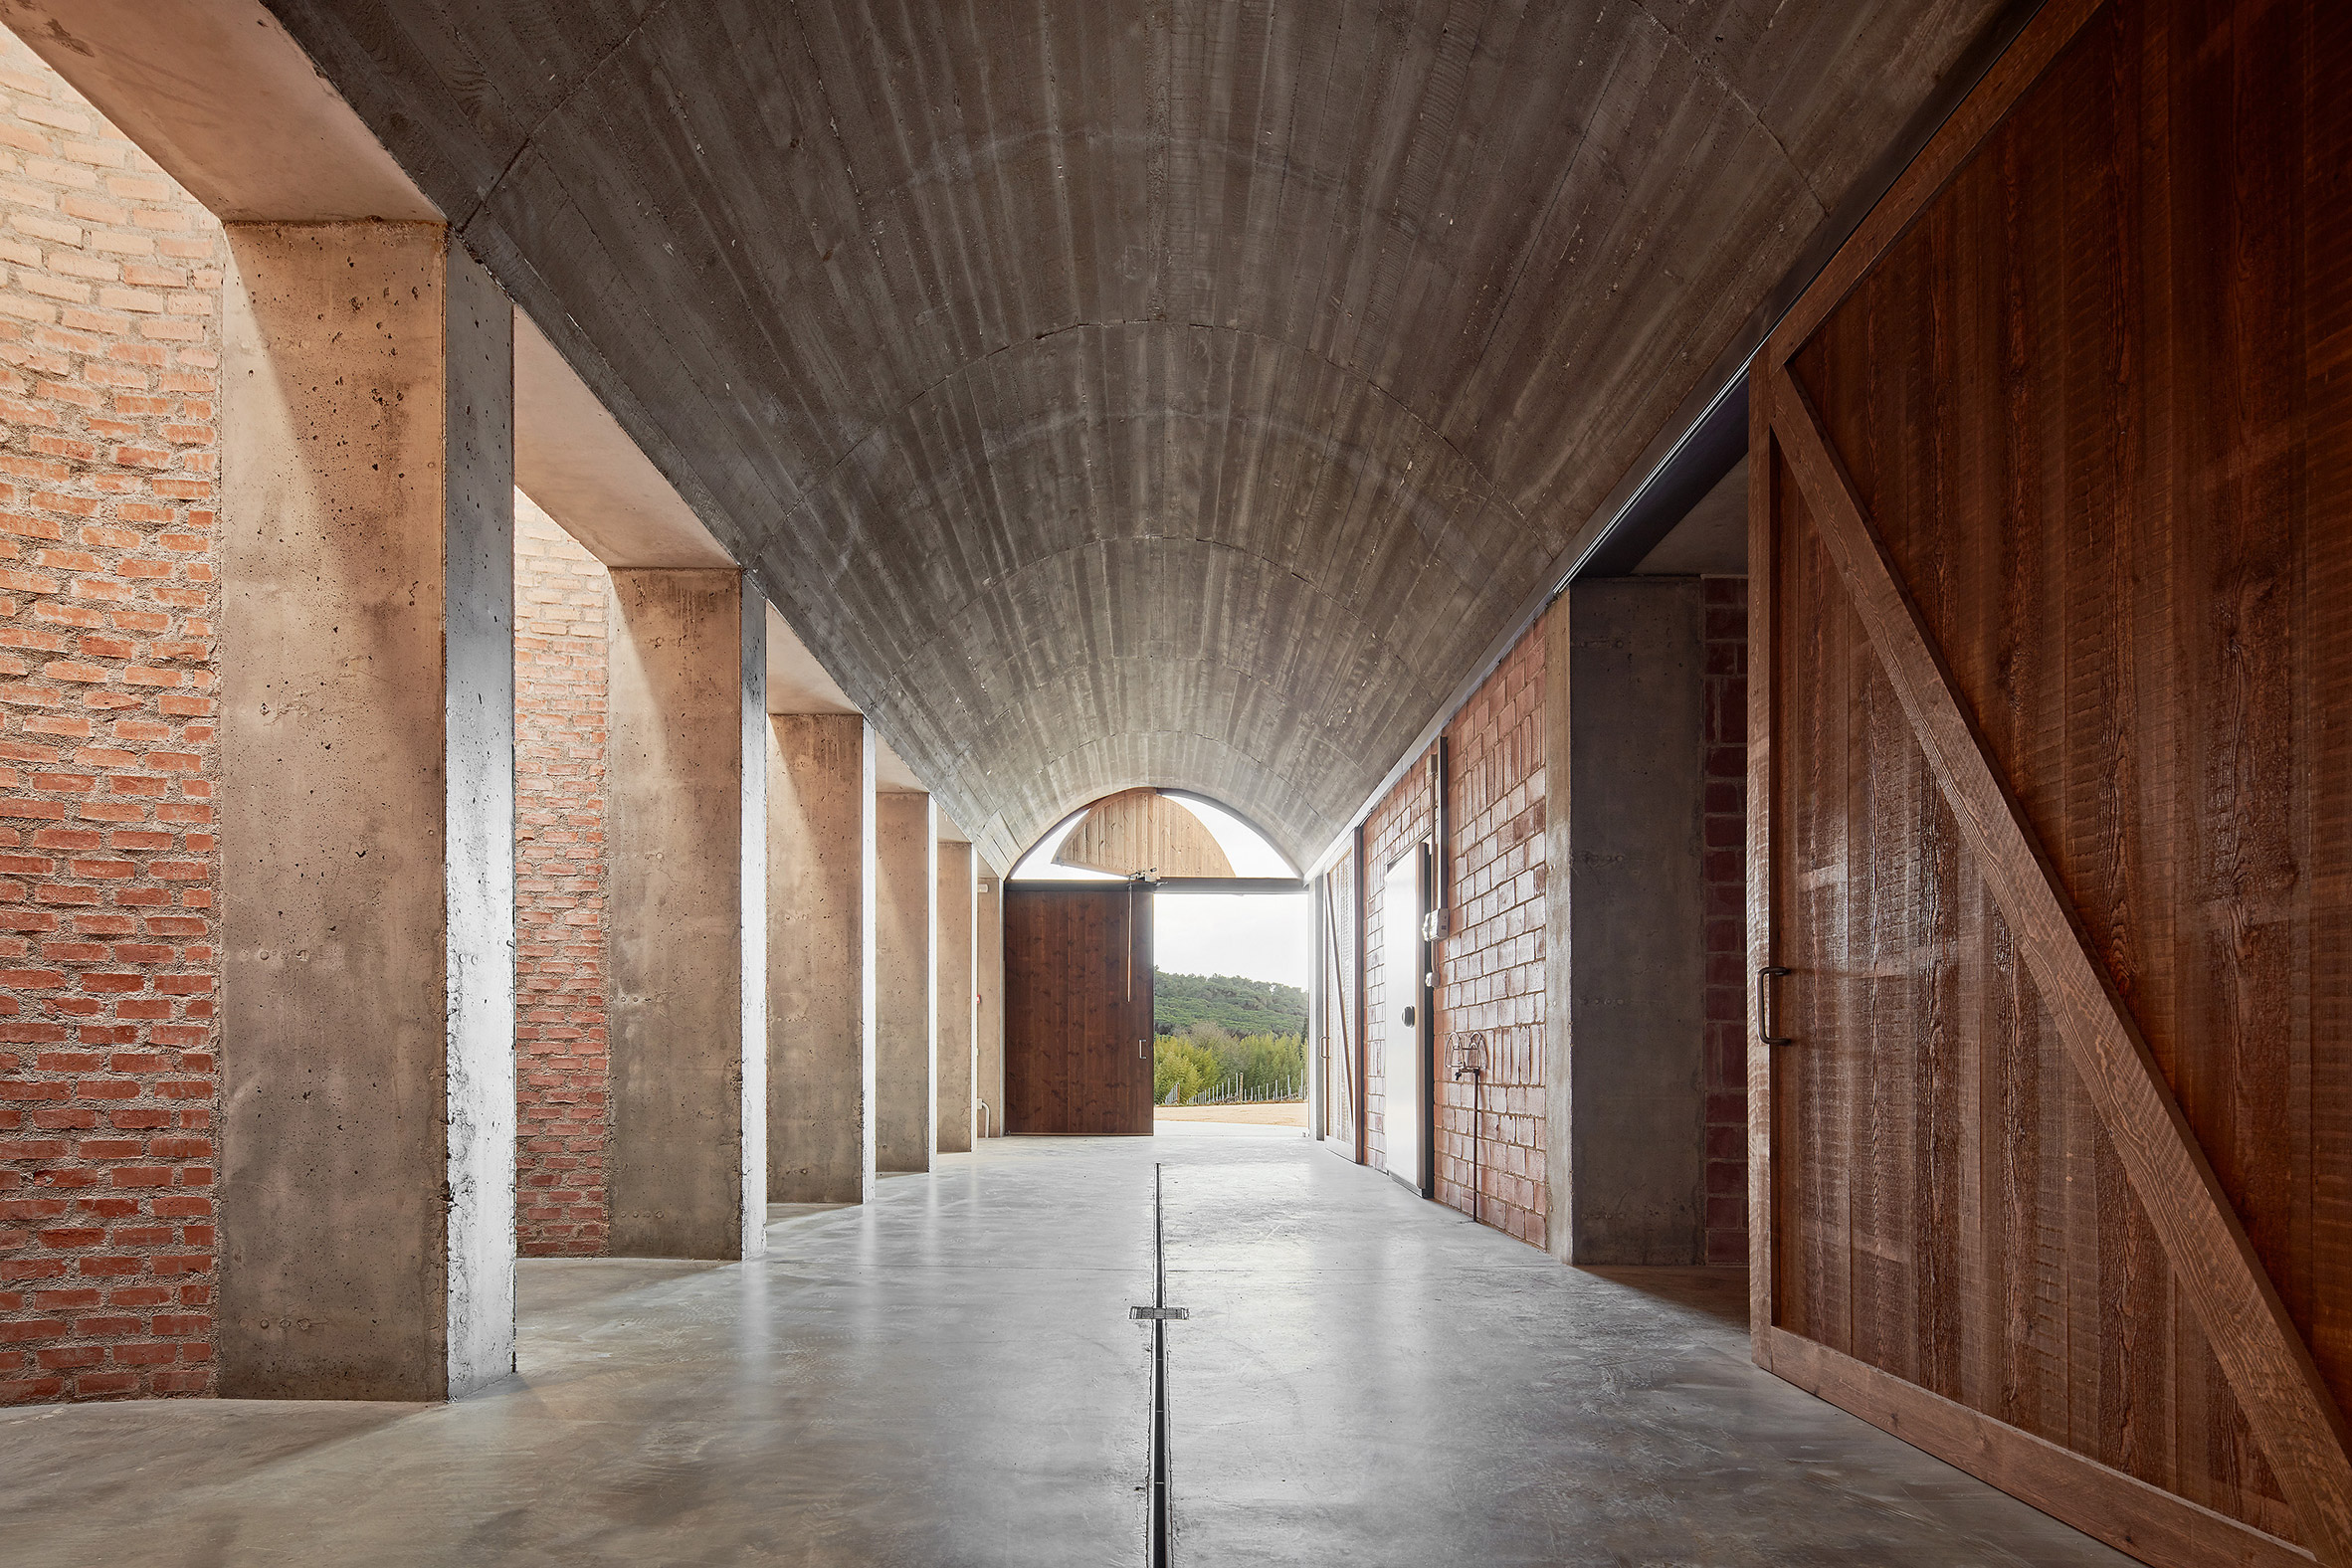 The Mont-Ras Winery in Girona by Jorge Vidal Arquitectos